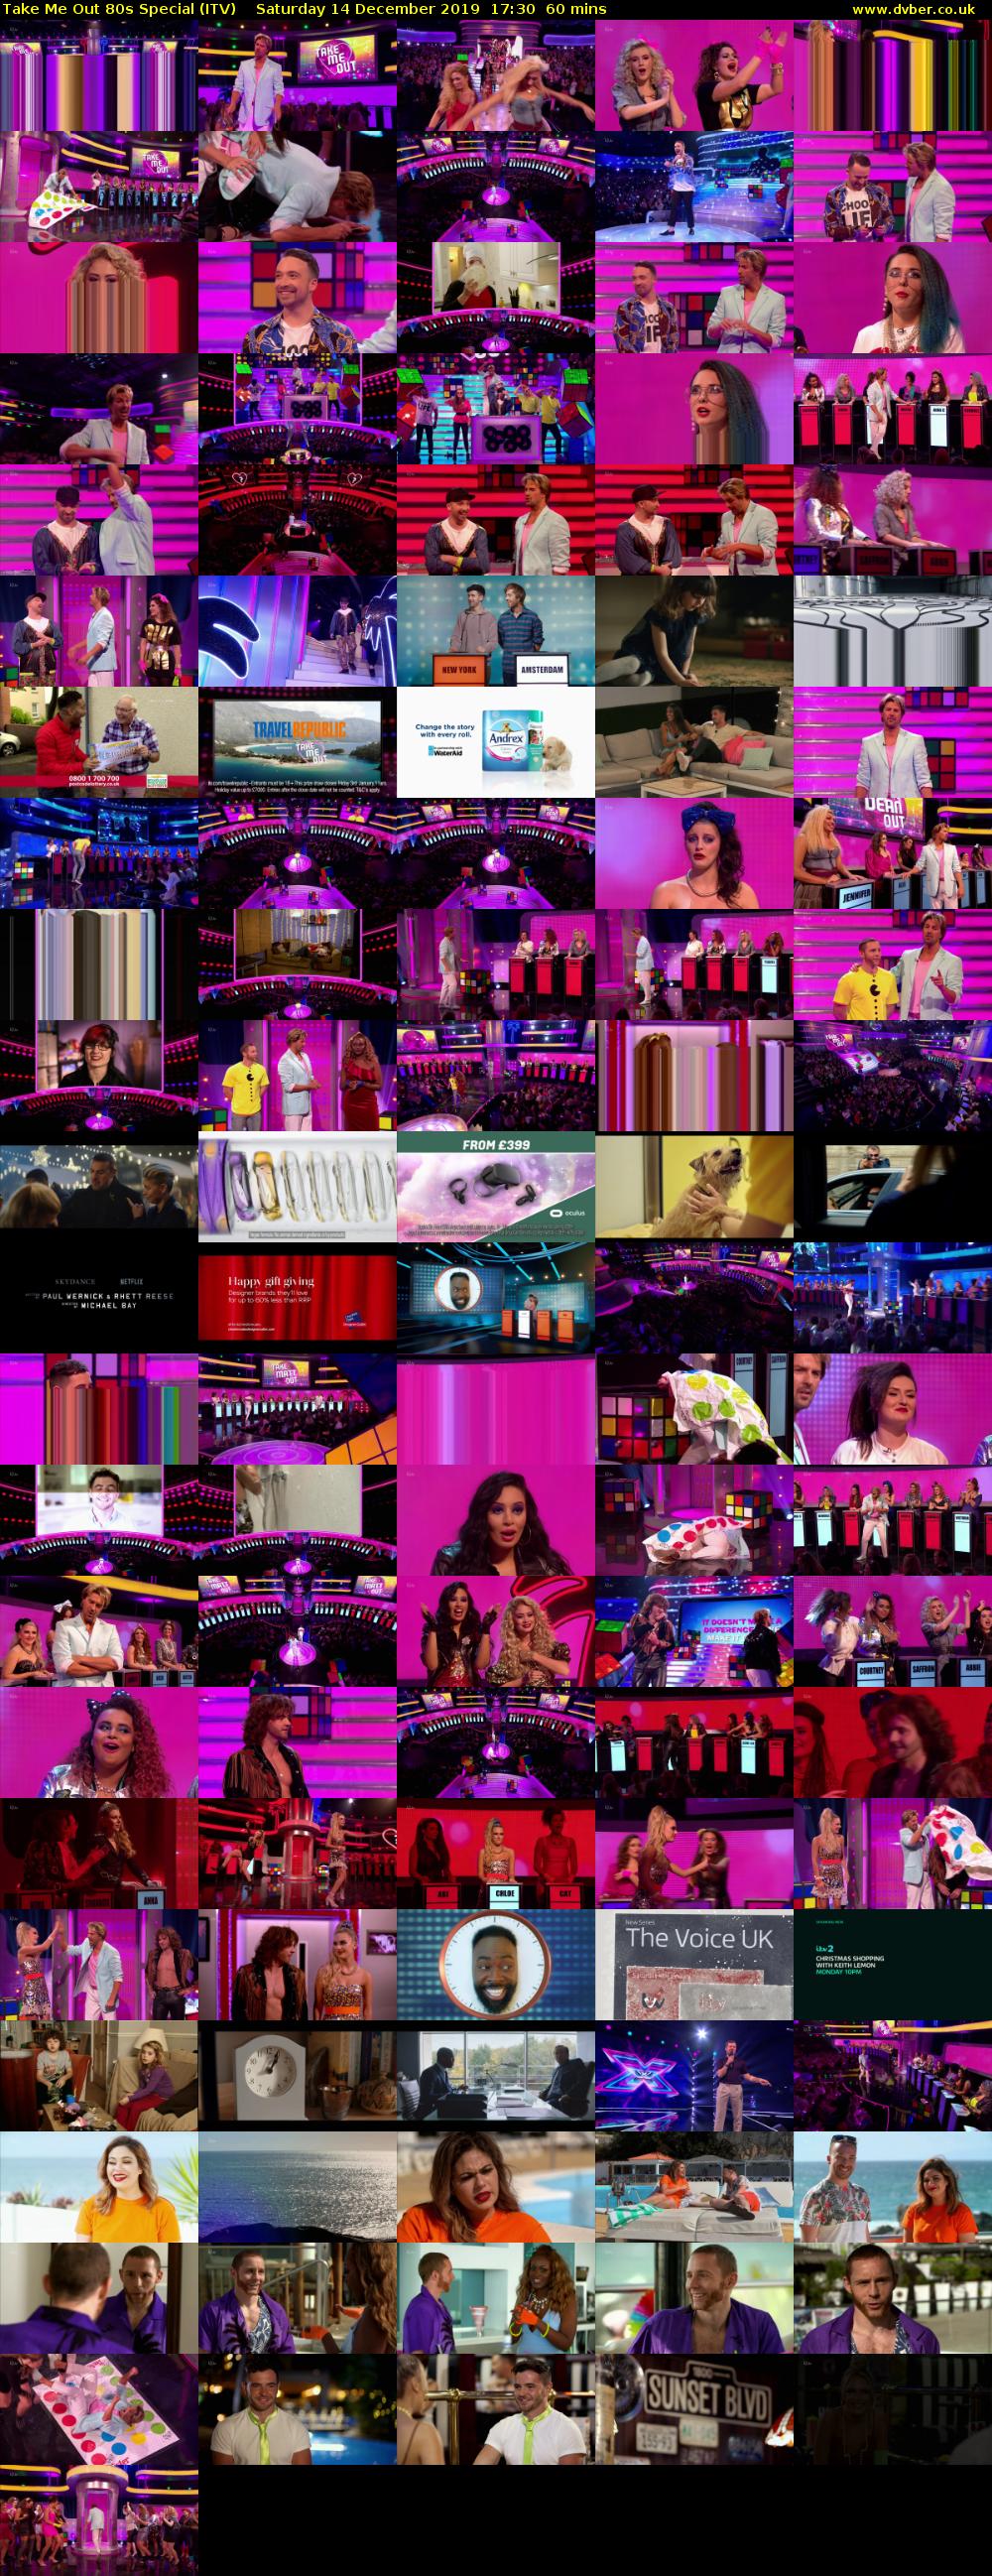 Take Me Out 80s Special (ITV) Saturday 14 December 2019 17:30 - 18:30